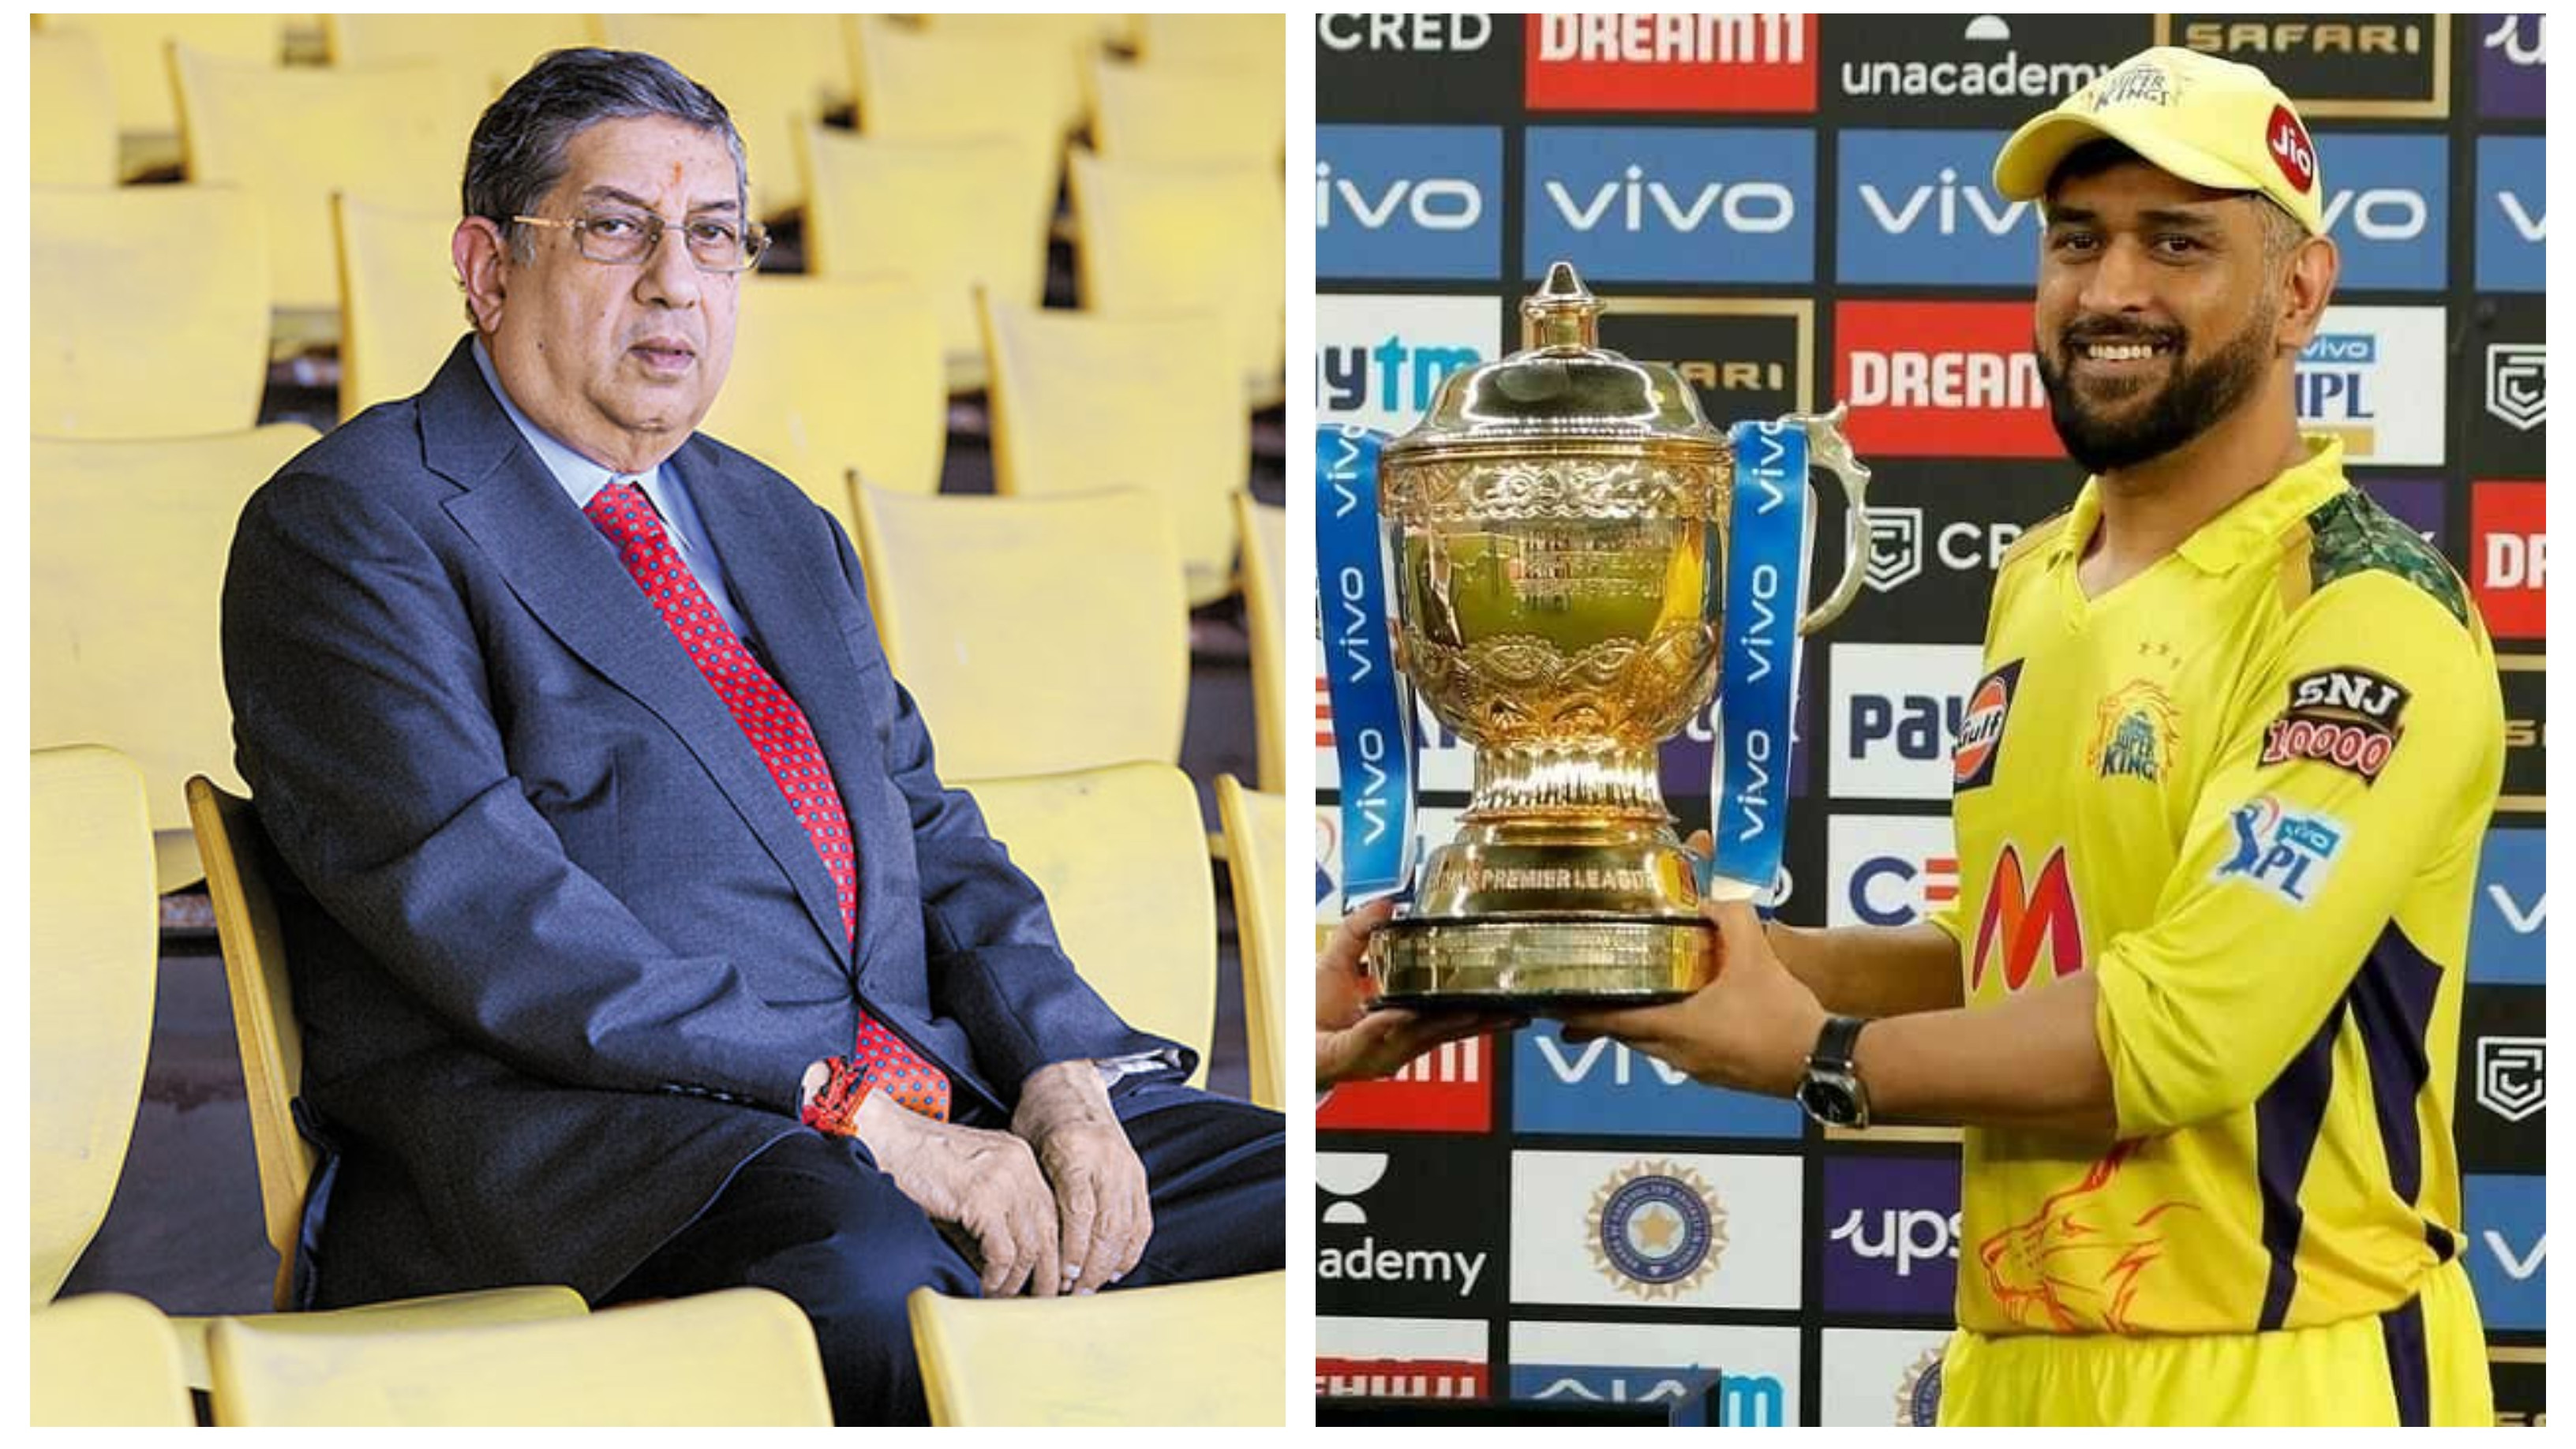 “There is no CSK without Dhoni and there is no Dhoni without CSK”, says N Srinivasan